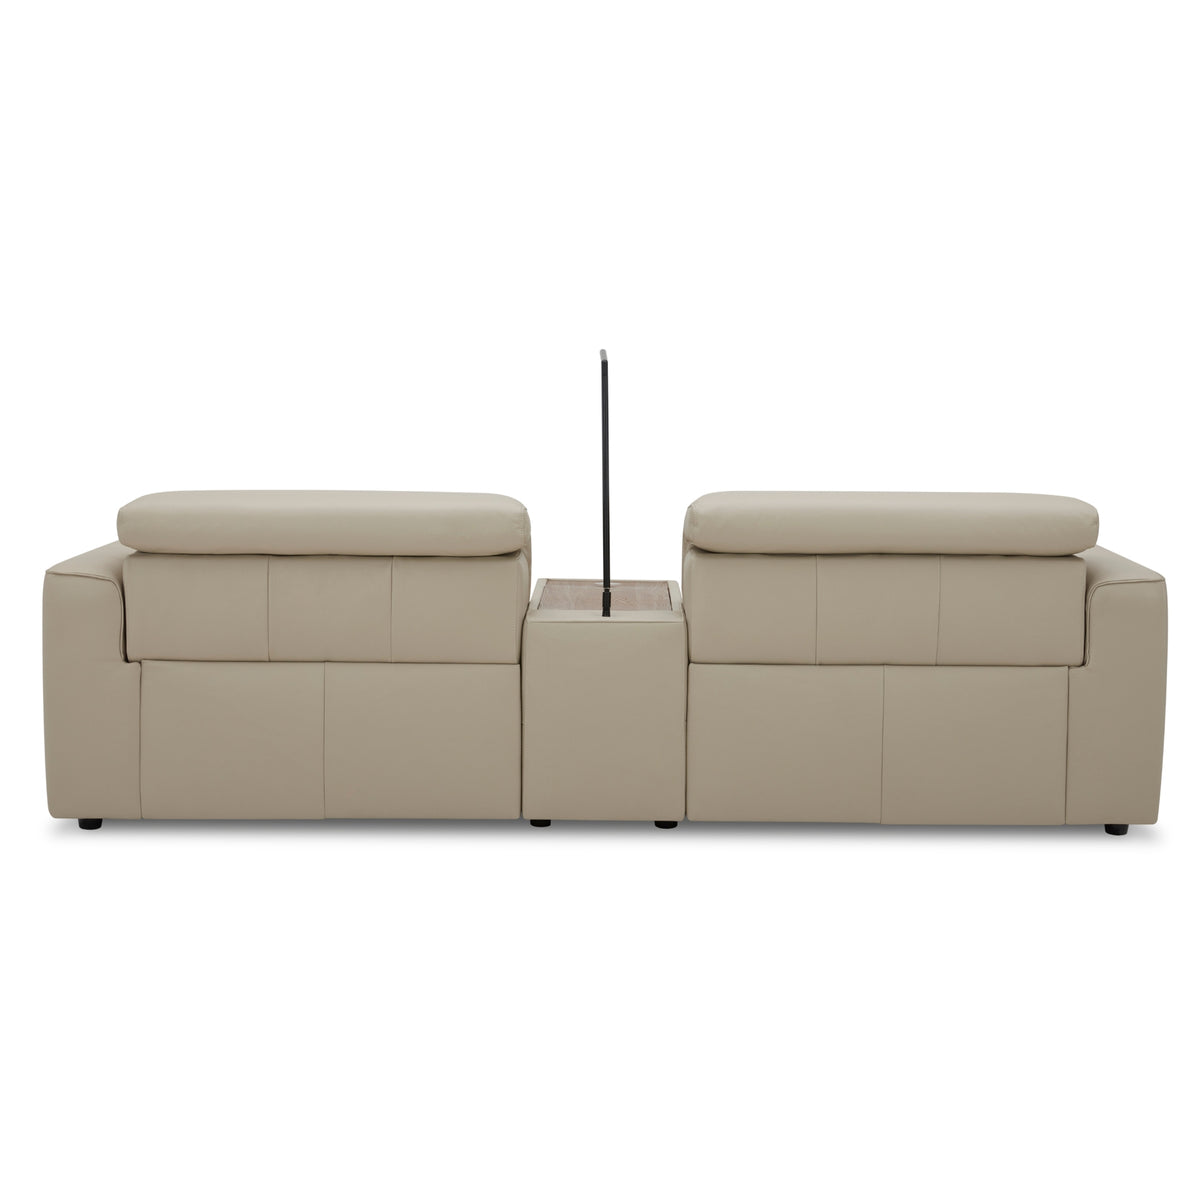 Hallie 2 Seater Leather Electric Recliner Sofa Beige 